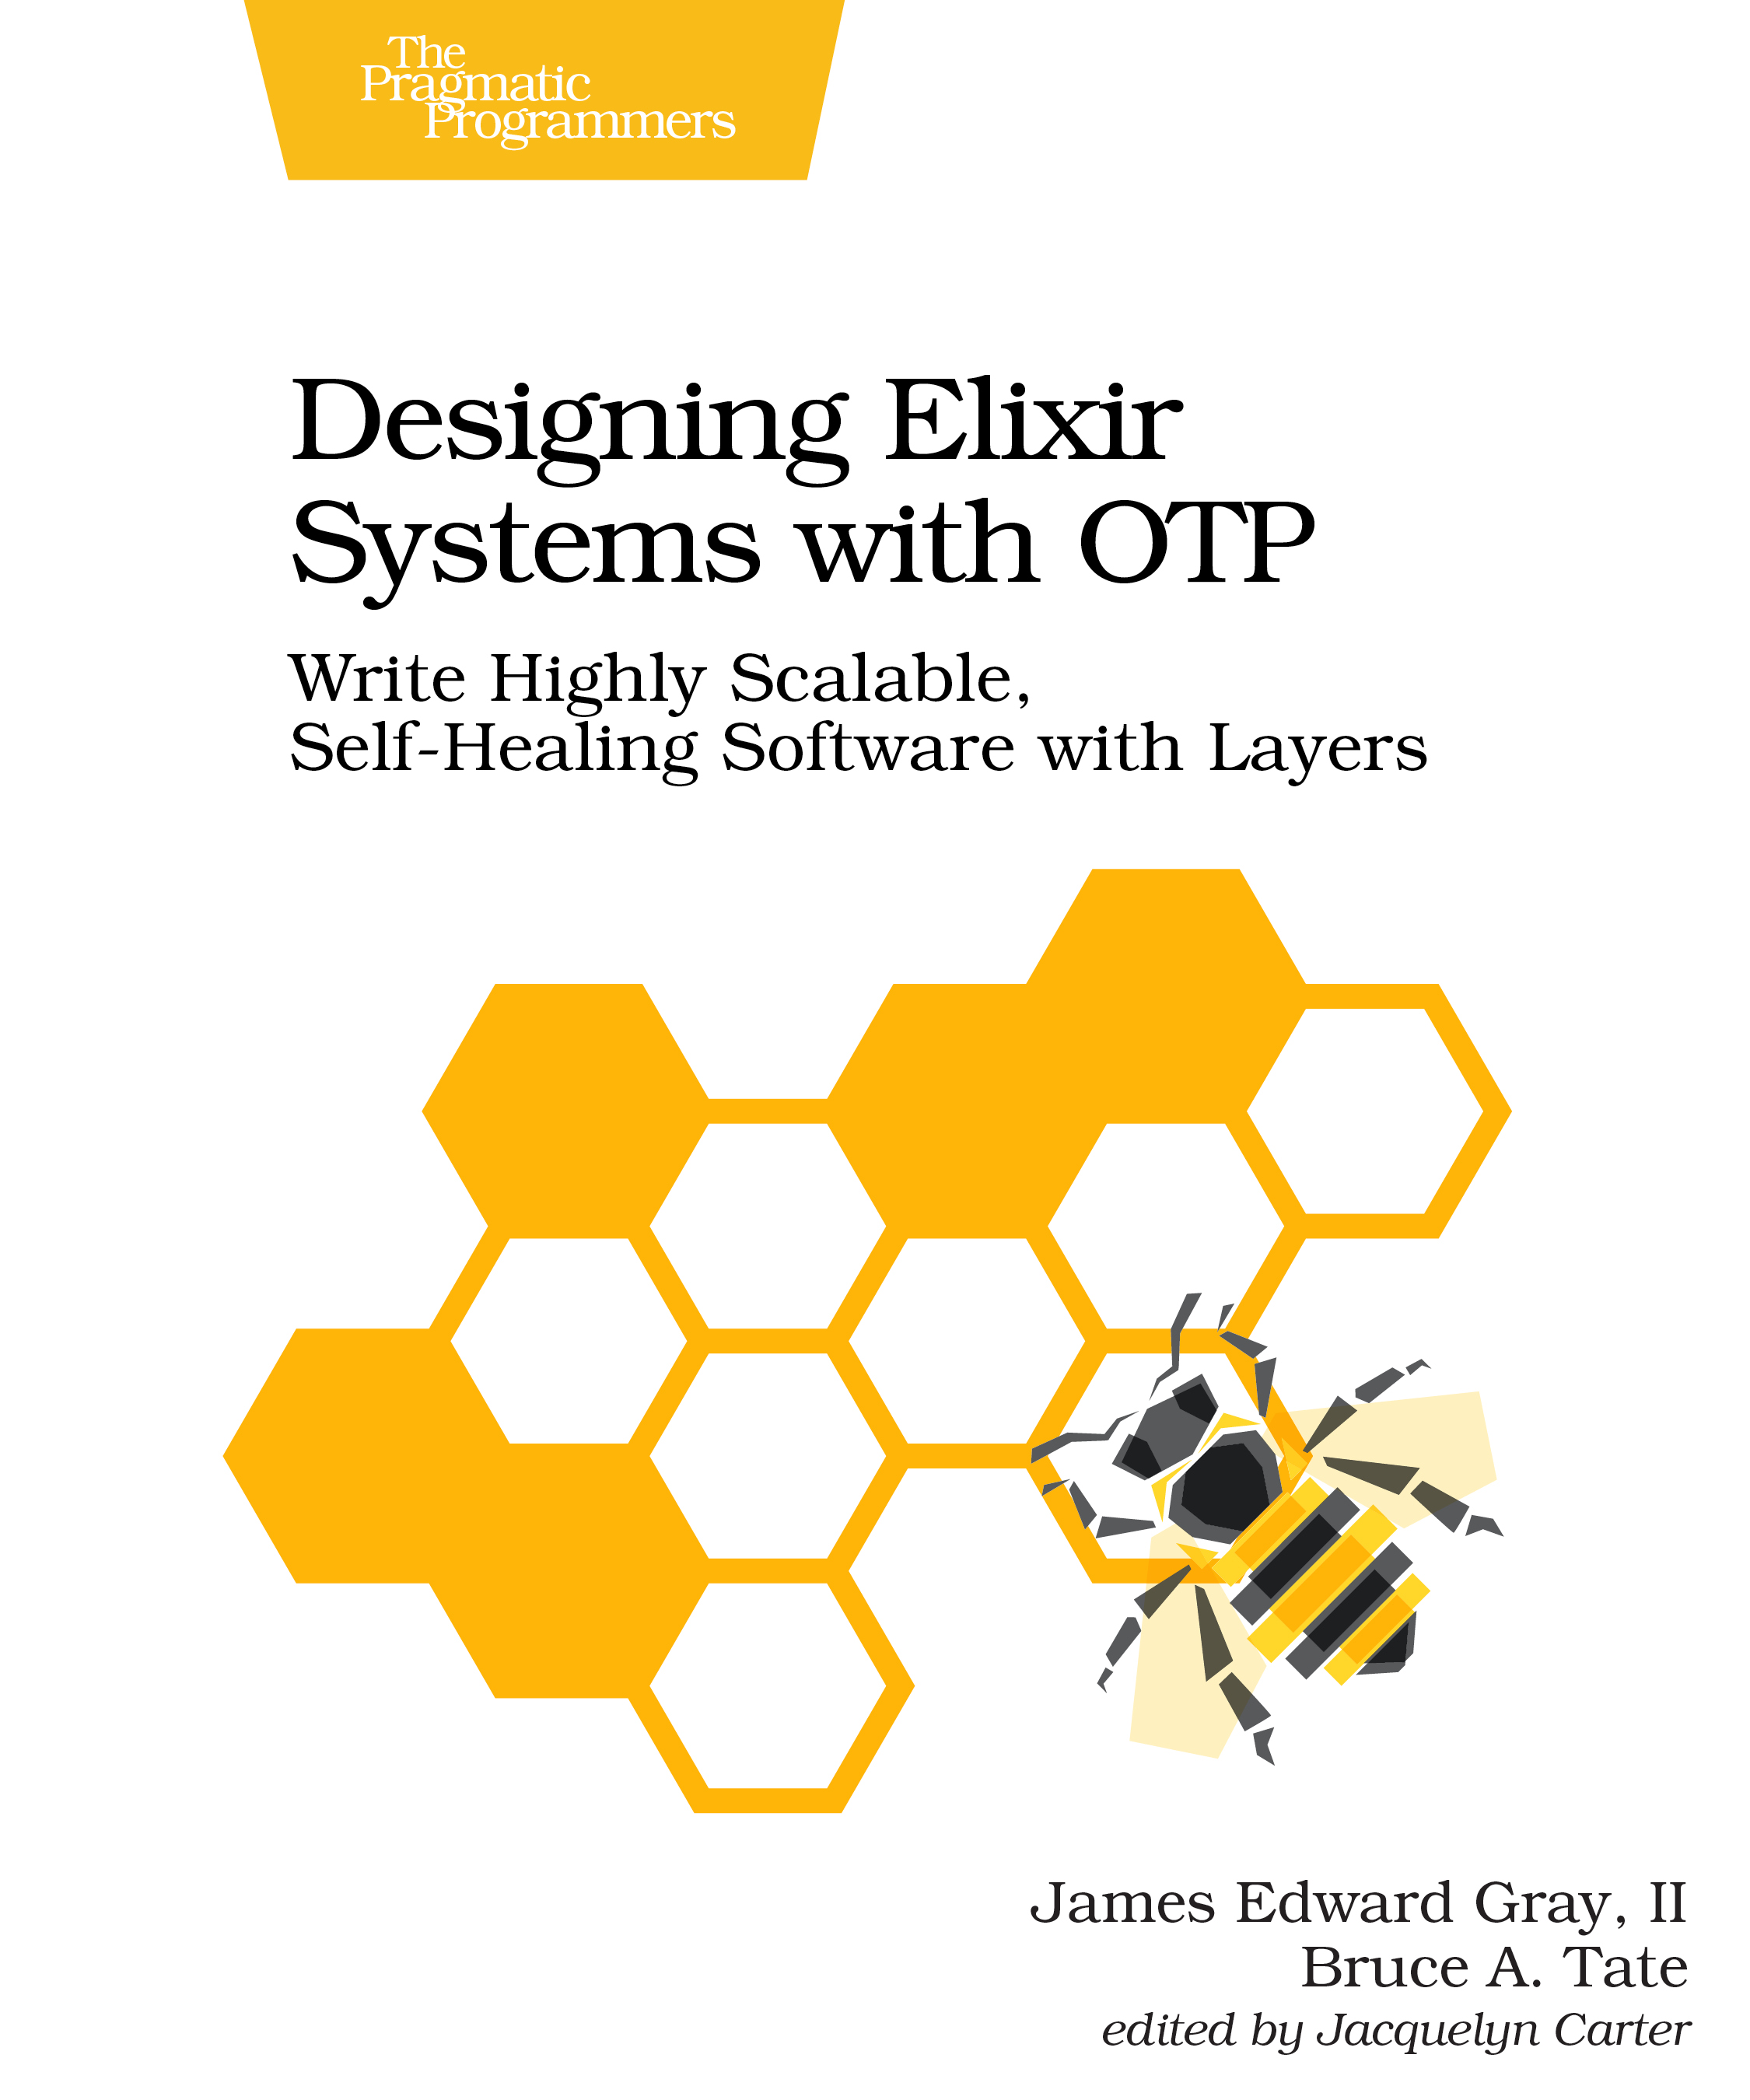 Review of the Book Design Elixir Systems with OTP